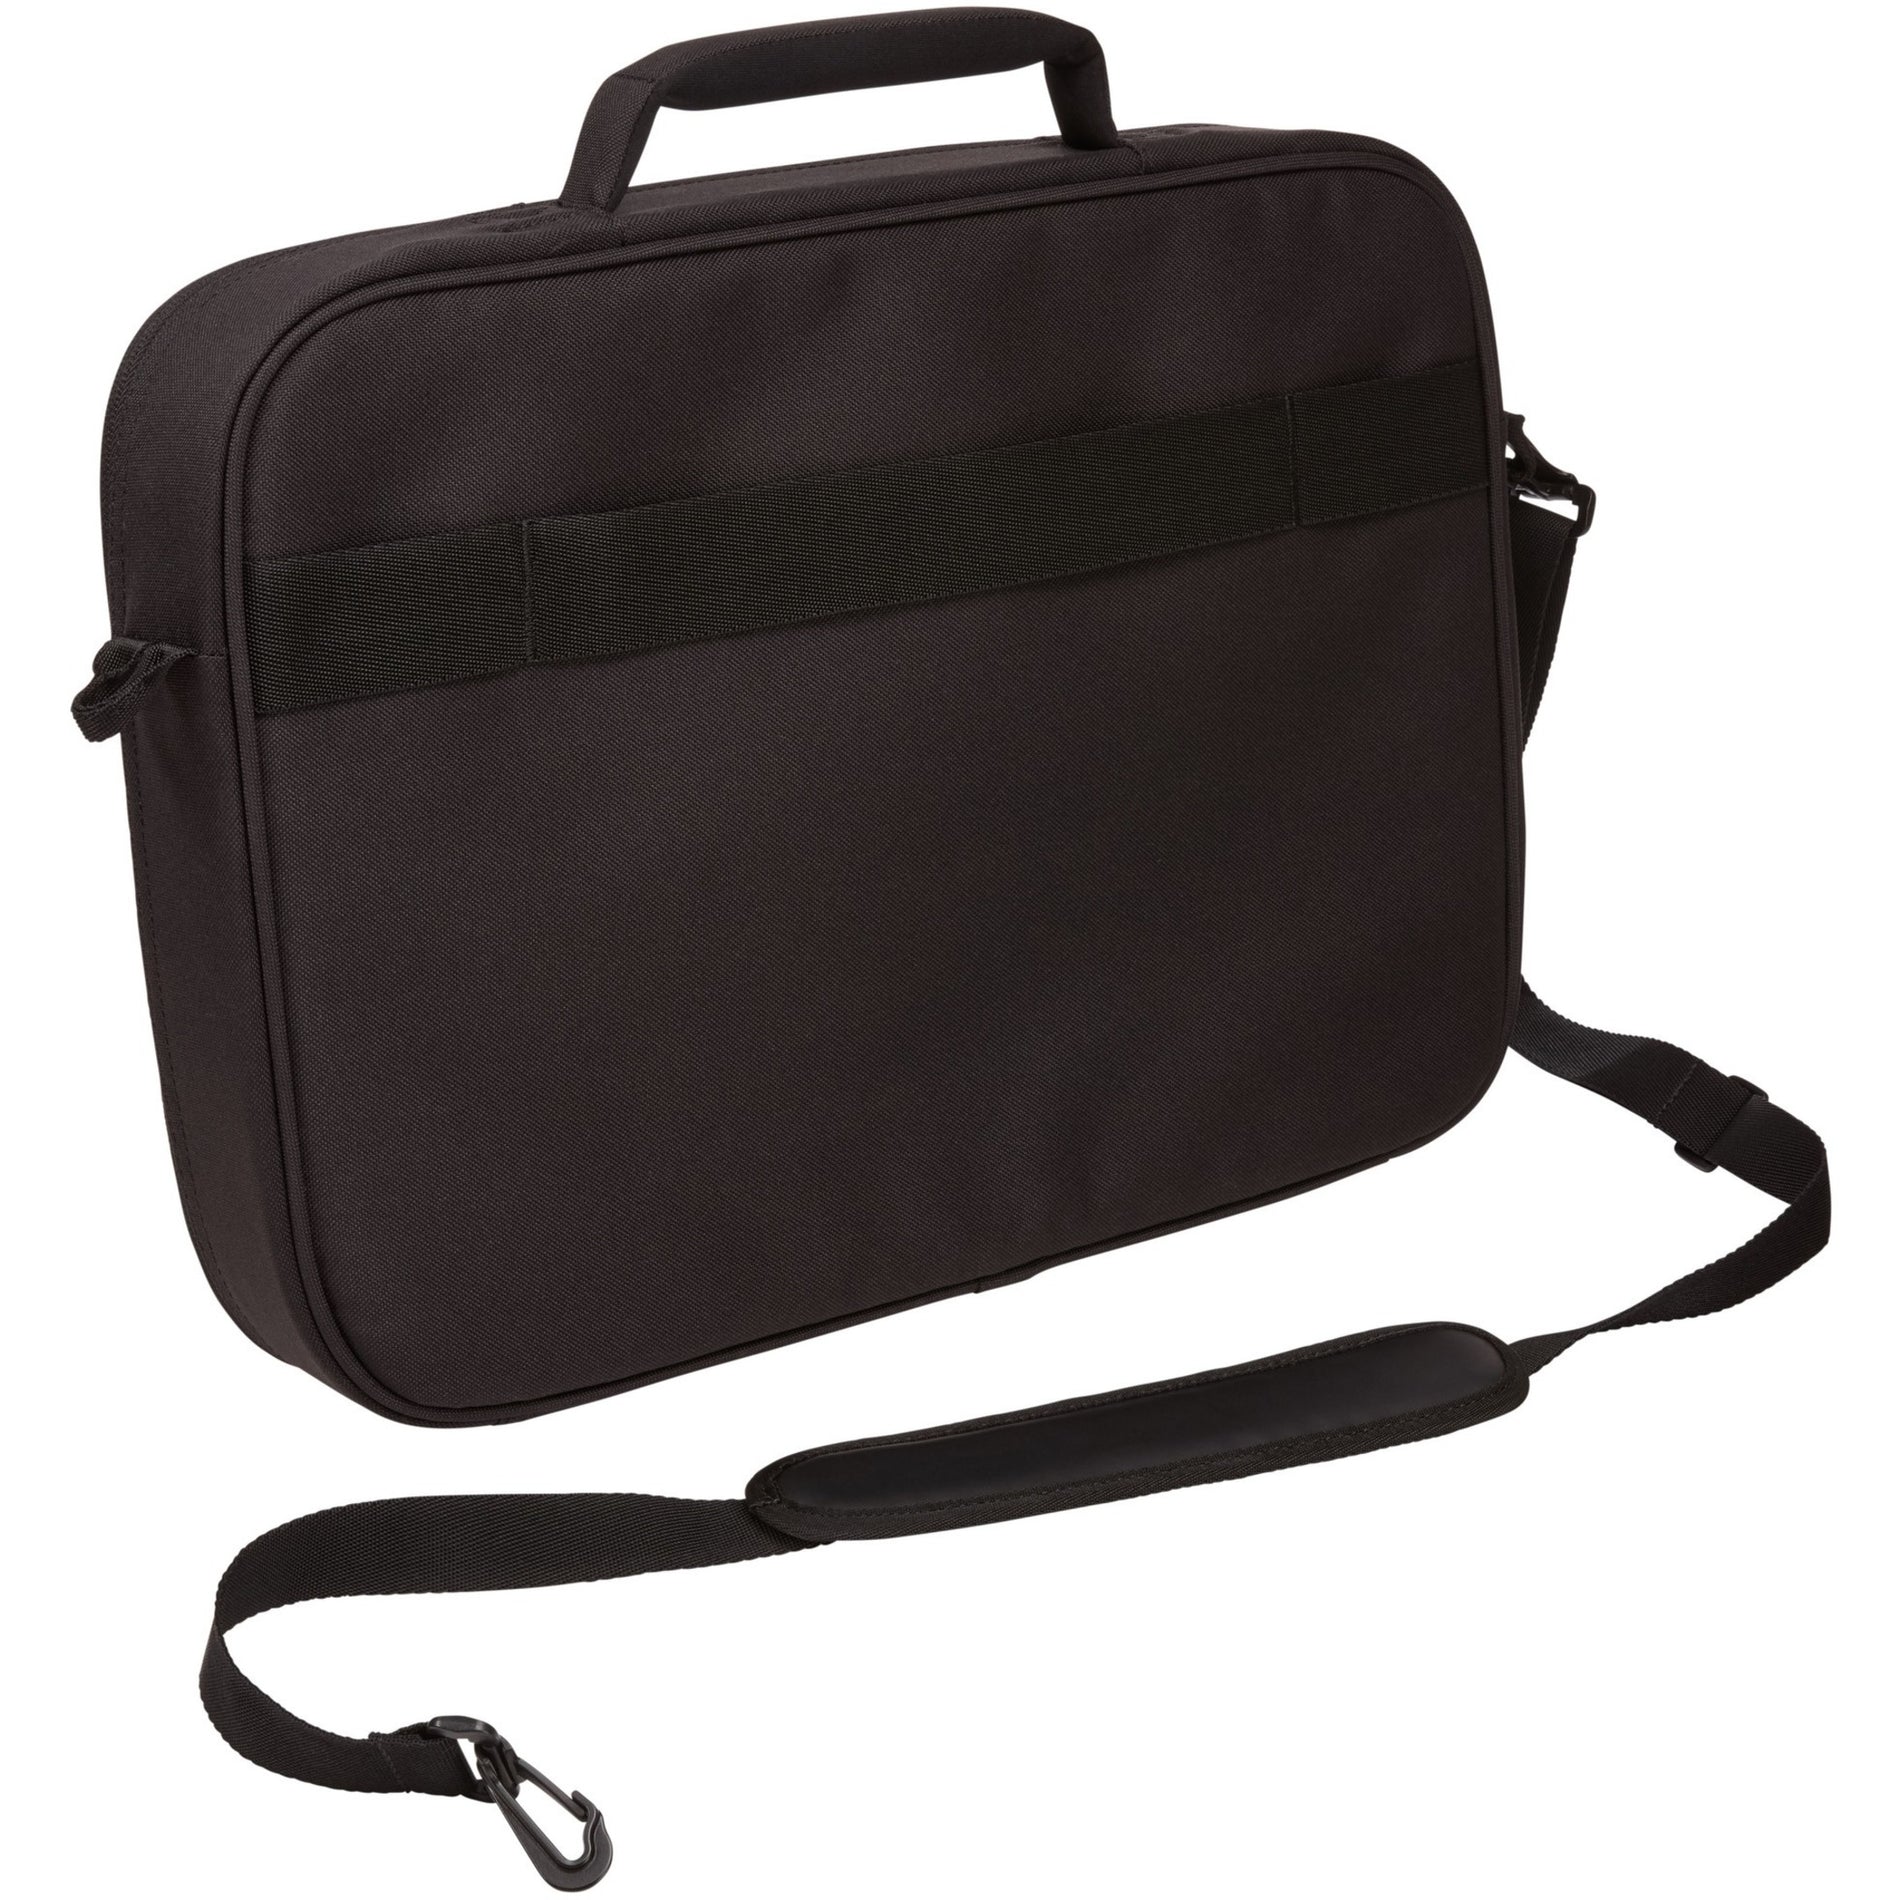 Case Logic 3203990 Advantage 15.6" Laptop Briefcase, Black - Stylish and Functional Carrying Case for Electronics, Tablets, and Notebooks